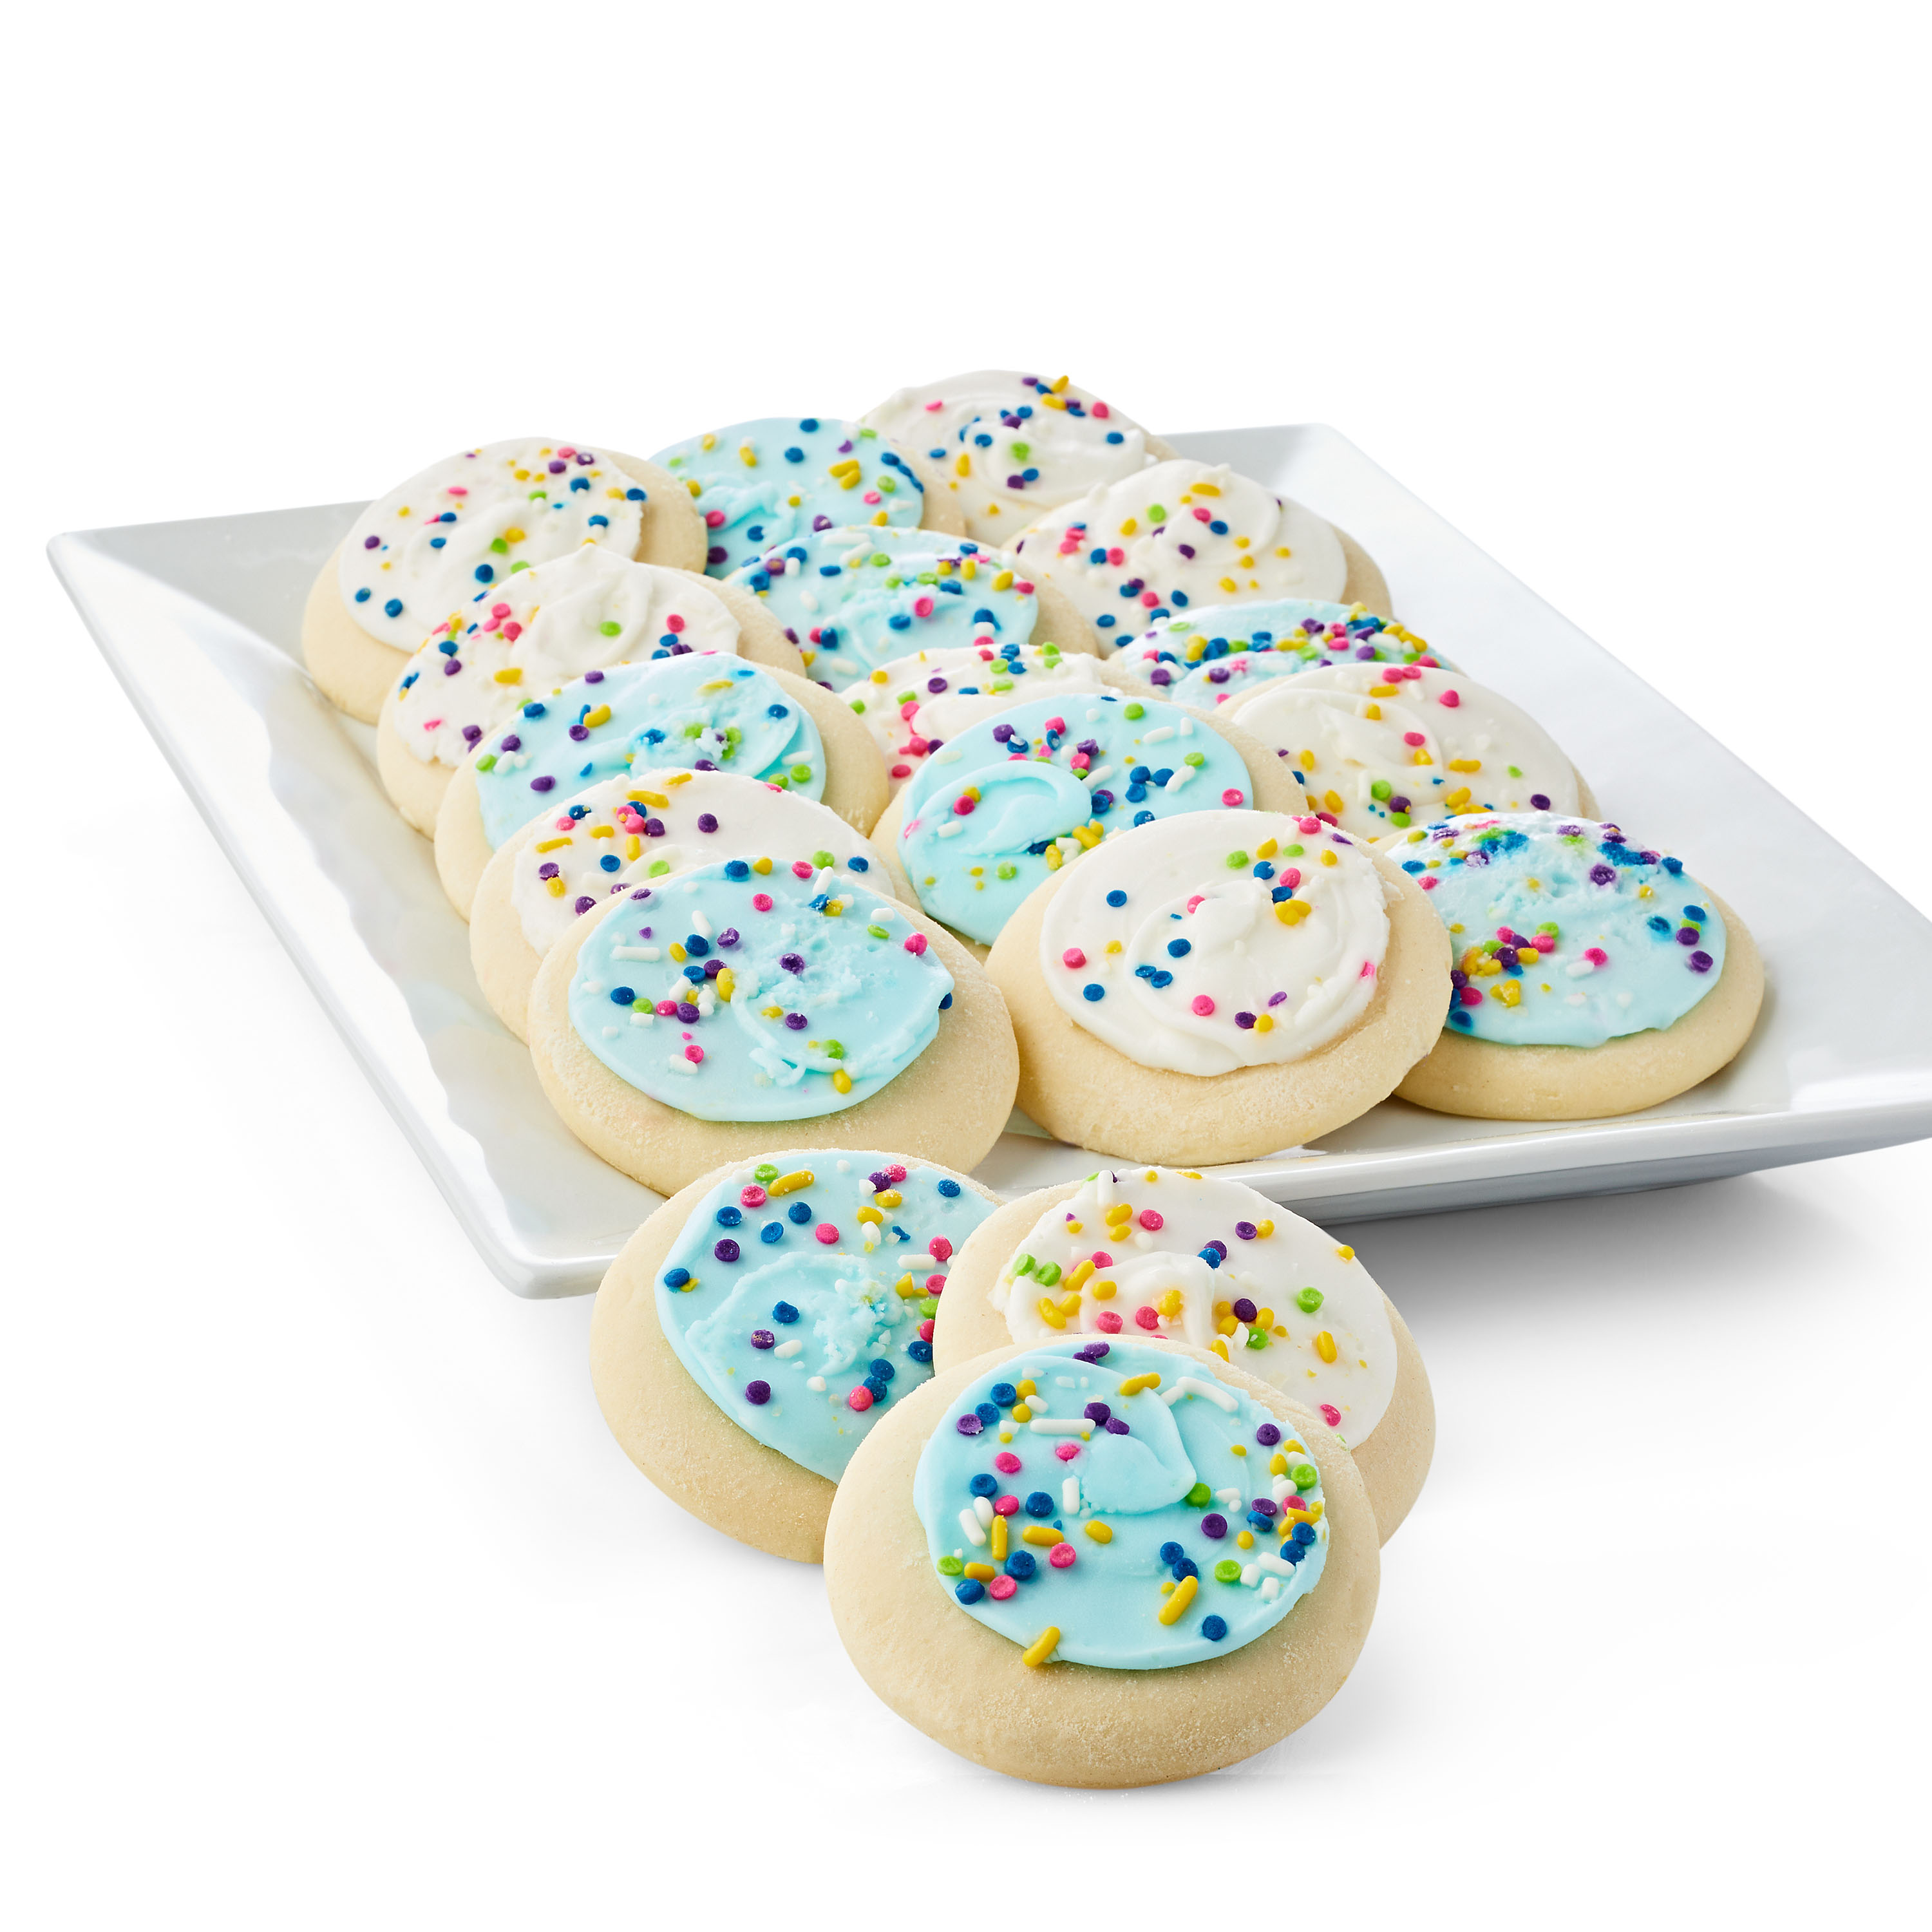 Freshness Guaranteed Frosted Sugar Cookies 24.3 oz, 18 Count - image 3 of 9